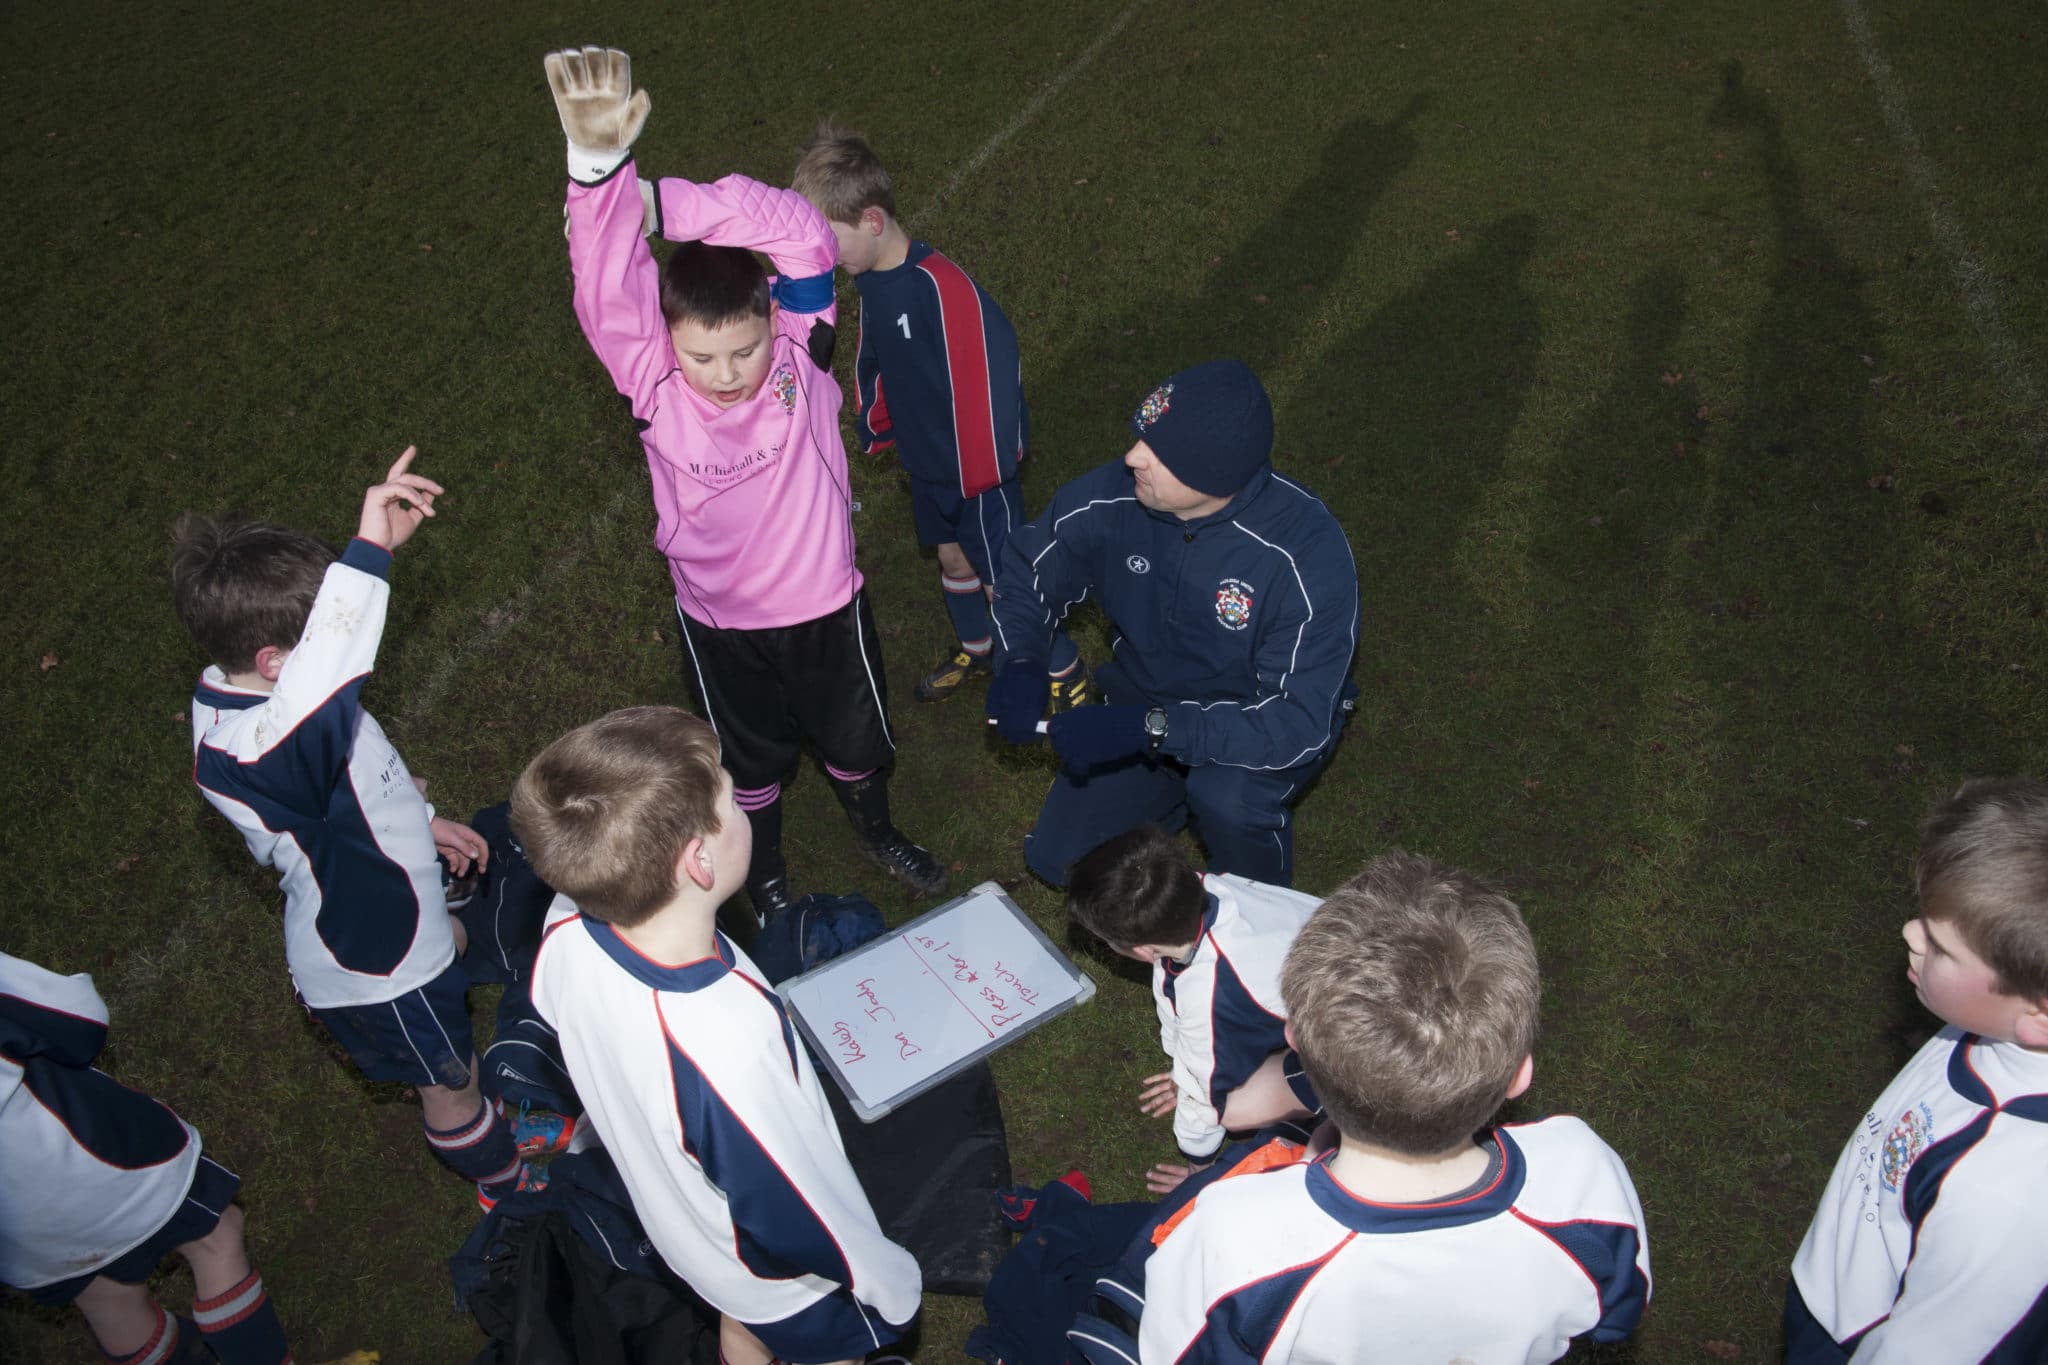 How long should you spend talking through individual tactics with players?